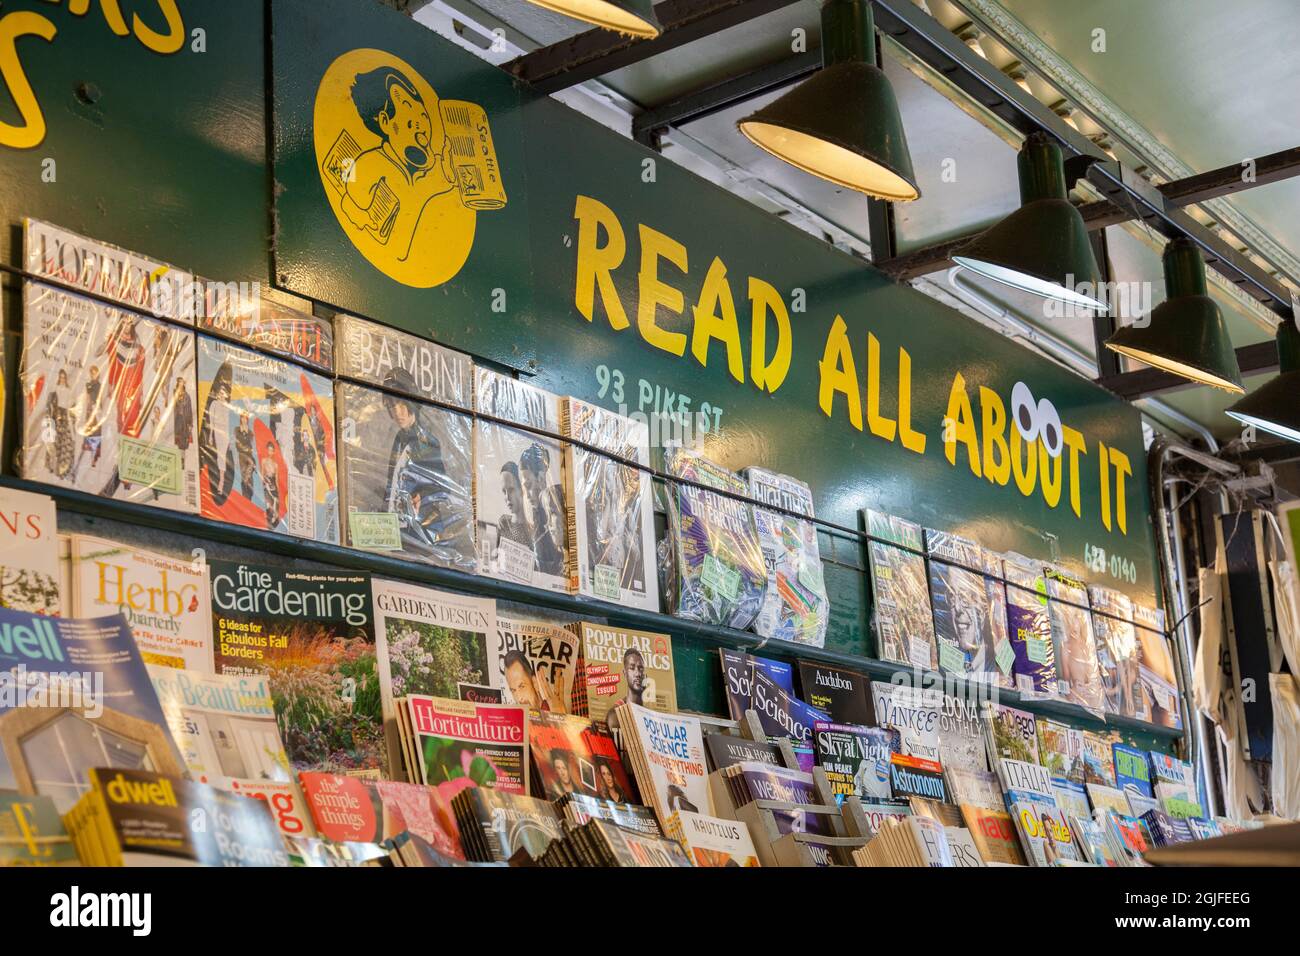 Newsstand with magazines and newspapers for reading at Pikes Place Market, Seattle, Washington State. Stock Photo